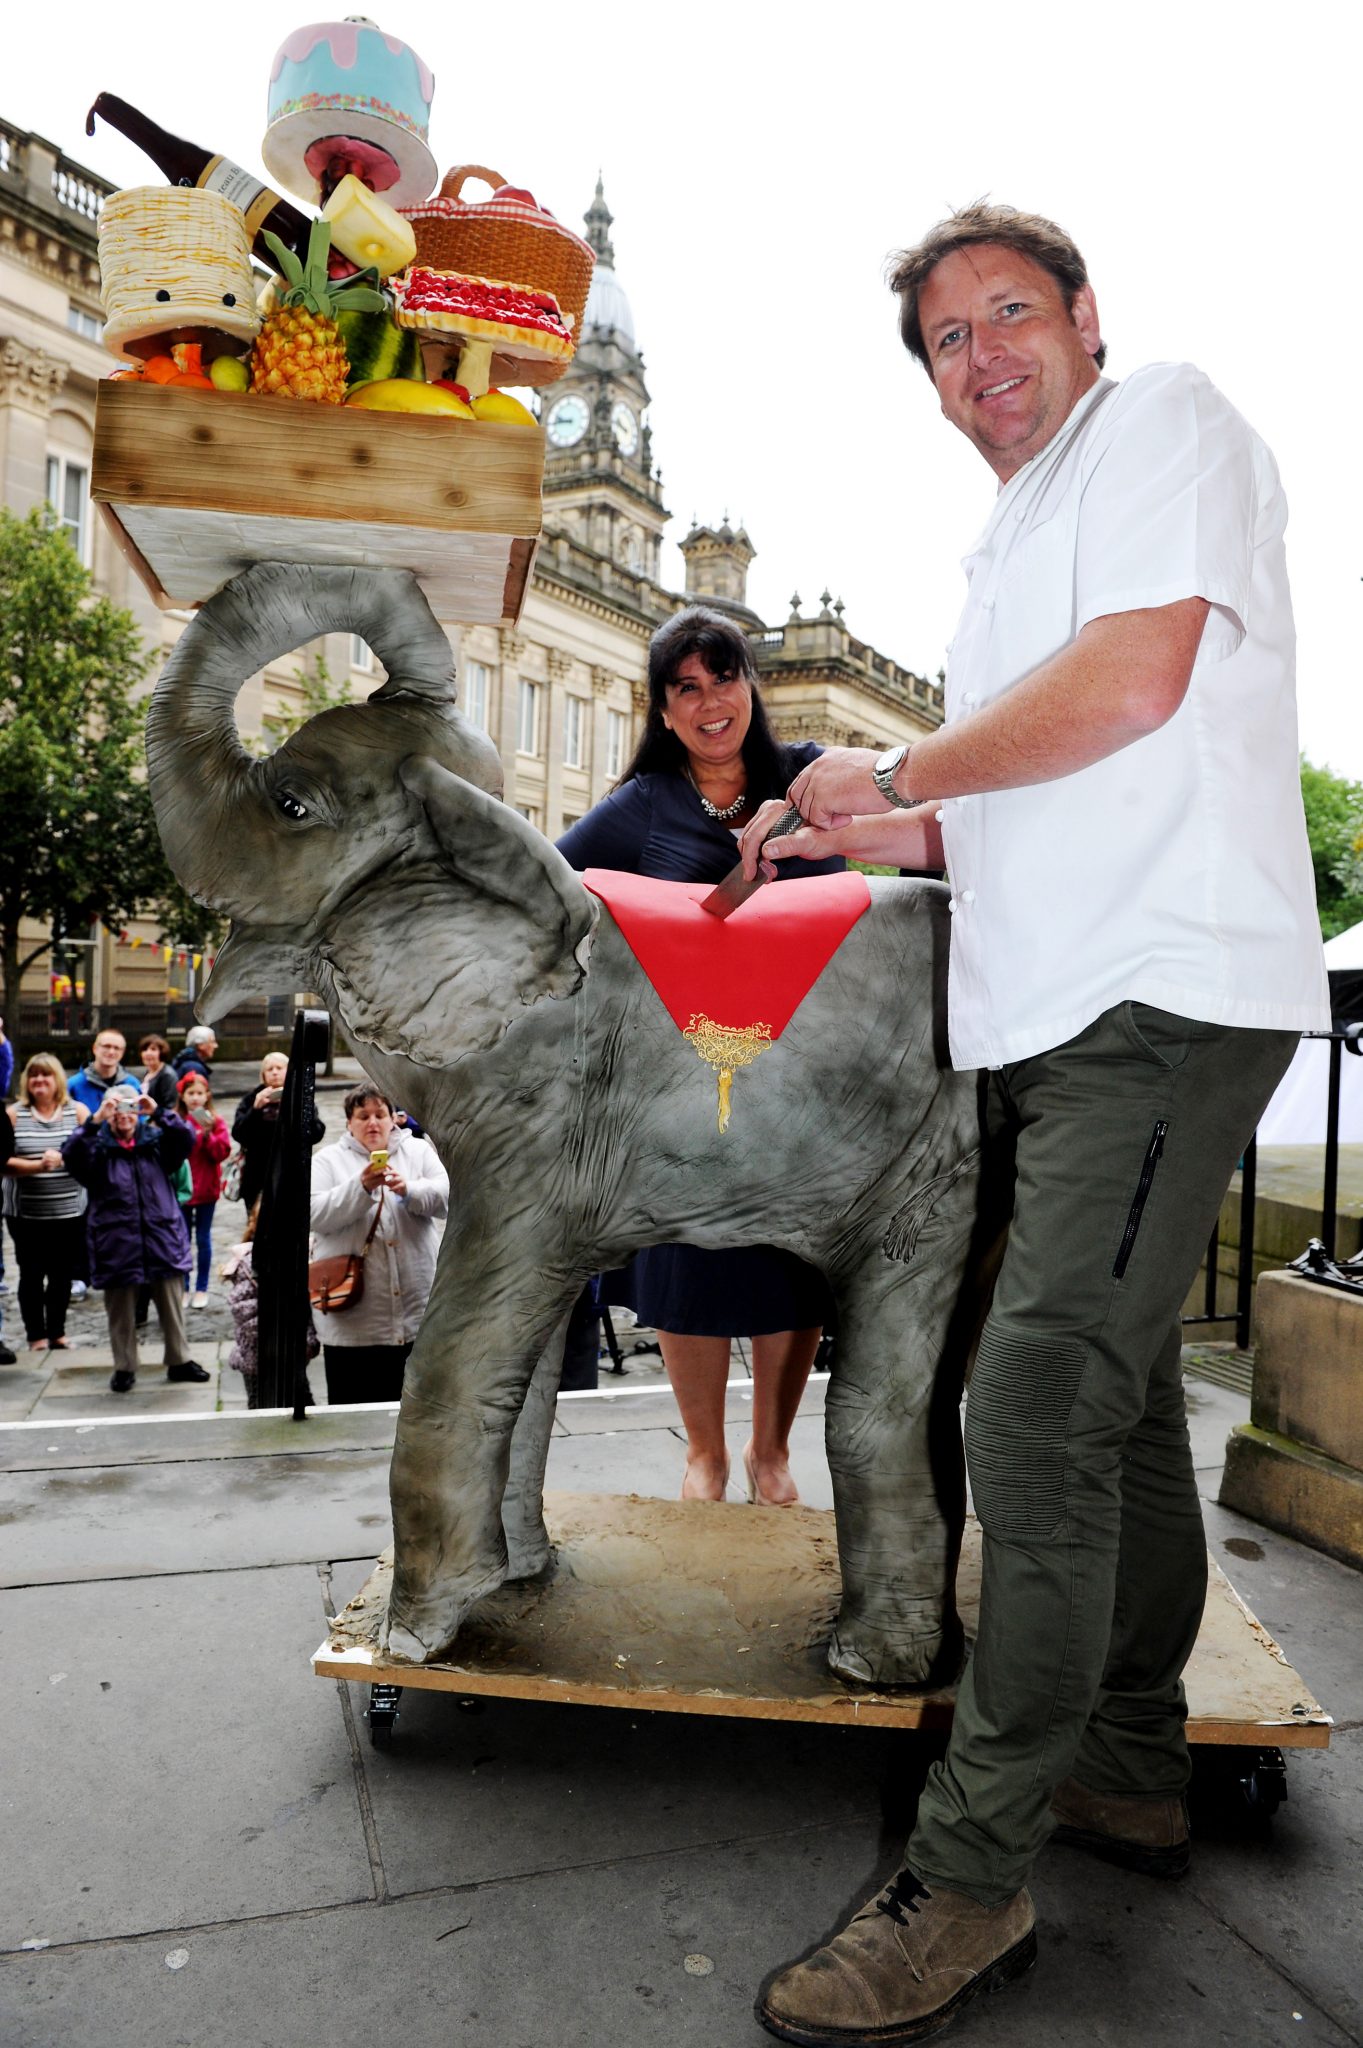 The 10th annual Bolton Food and Drink Festival, Victoria Square, Bolton, Lancashire. Celebrity chef James Martin cuts into the 10th anniversary cake with maker Rosie Dummer. Picture by Paul Heyes, Monday August 31, 2015.